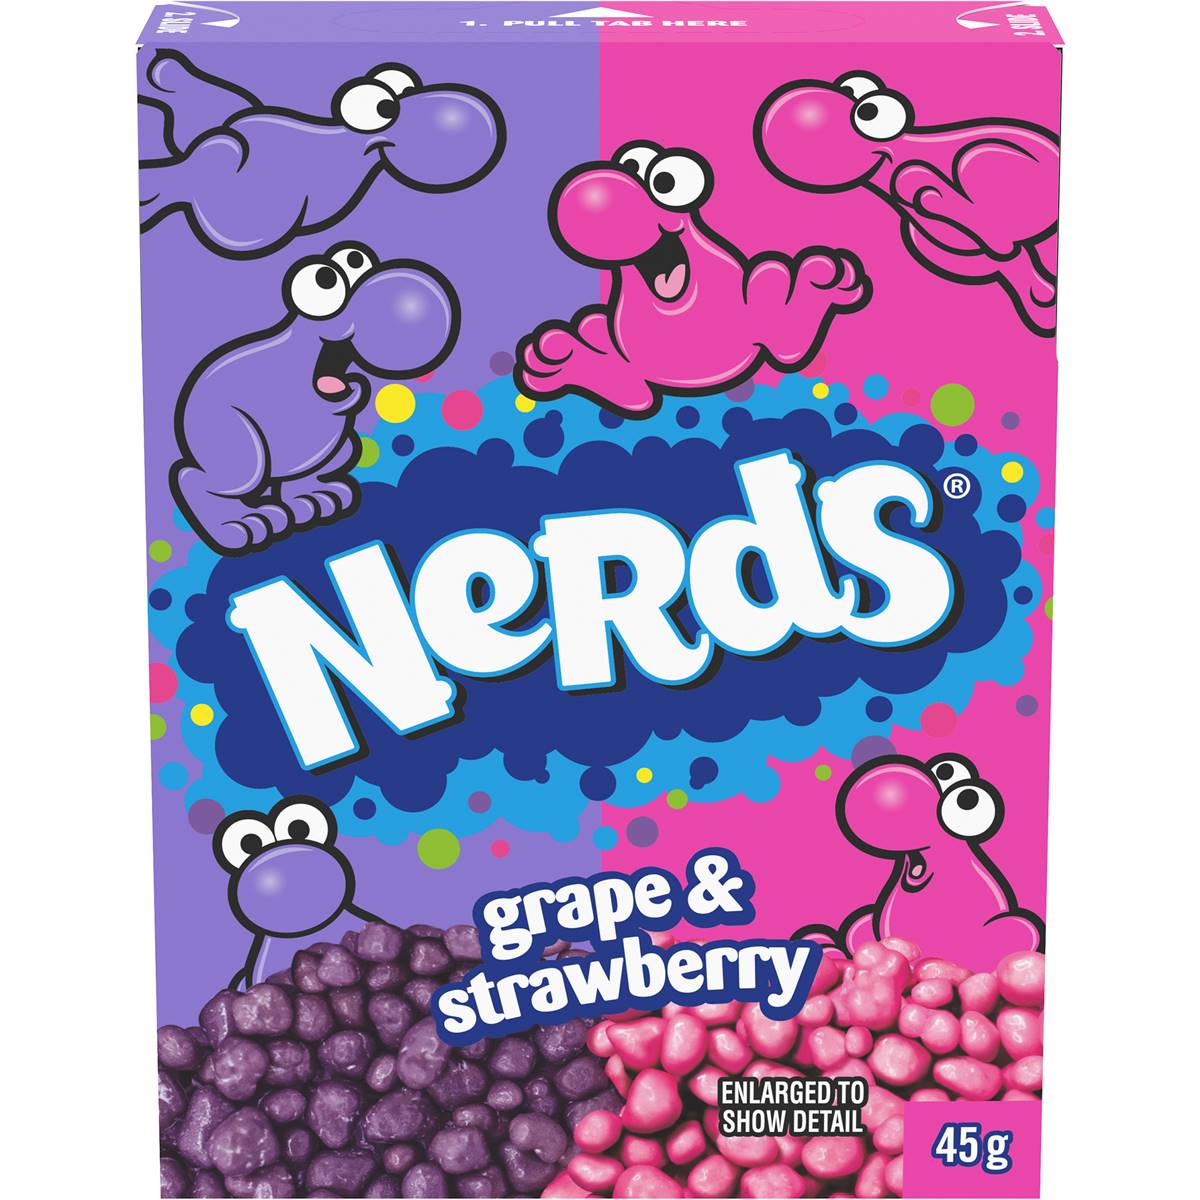 Calories in Nerds Grape & Strawberry